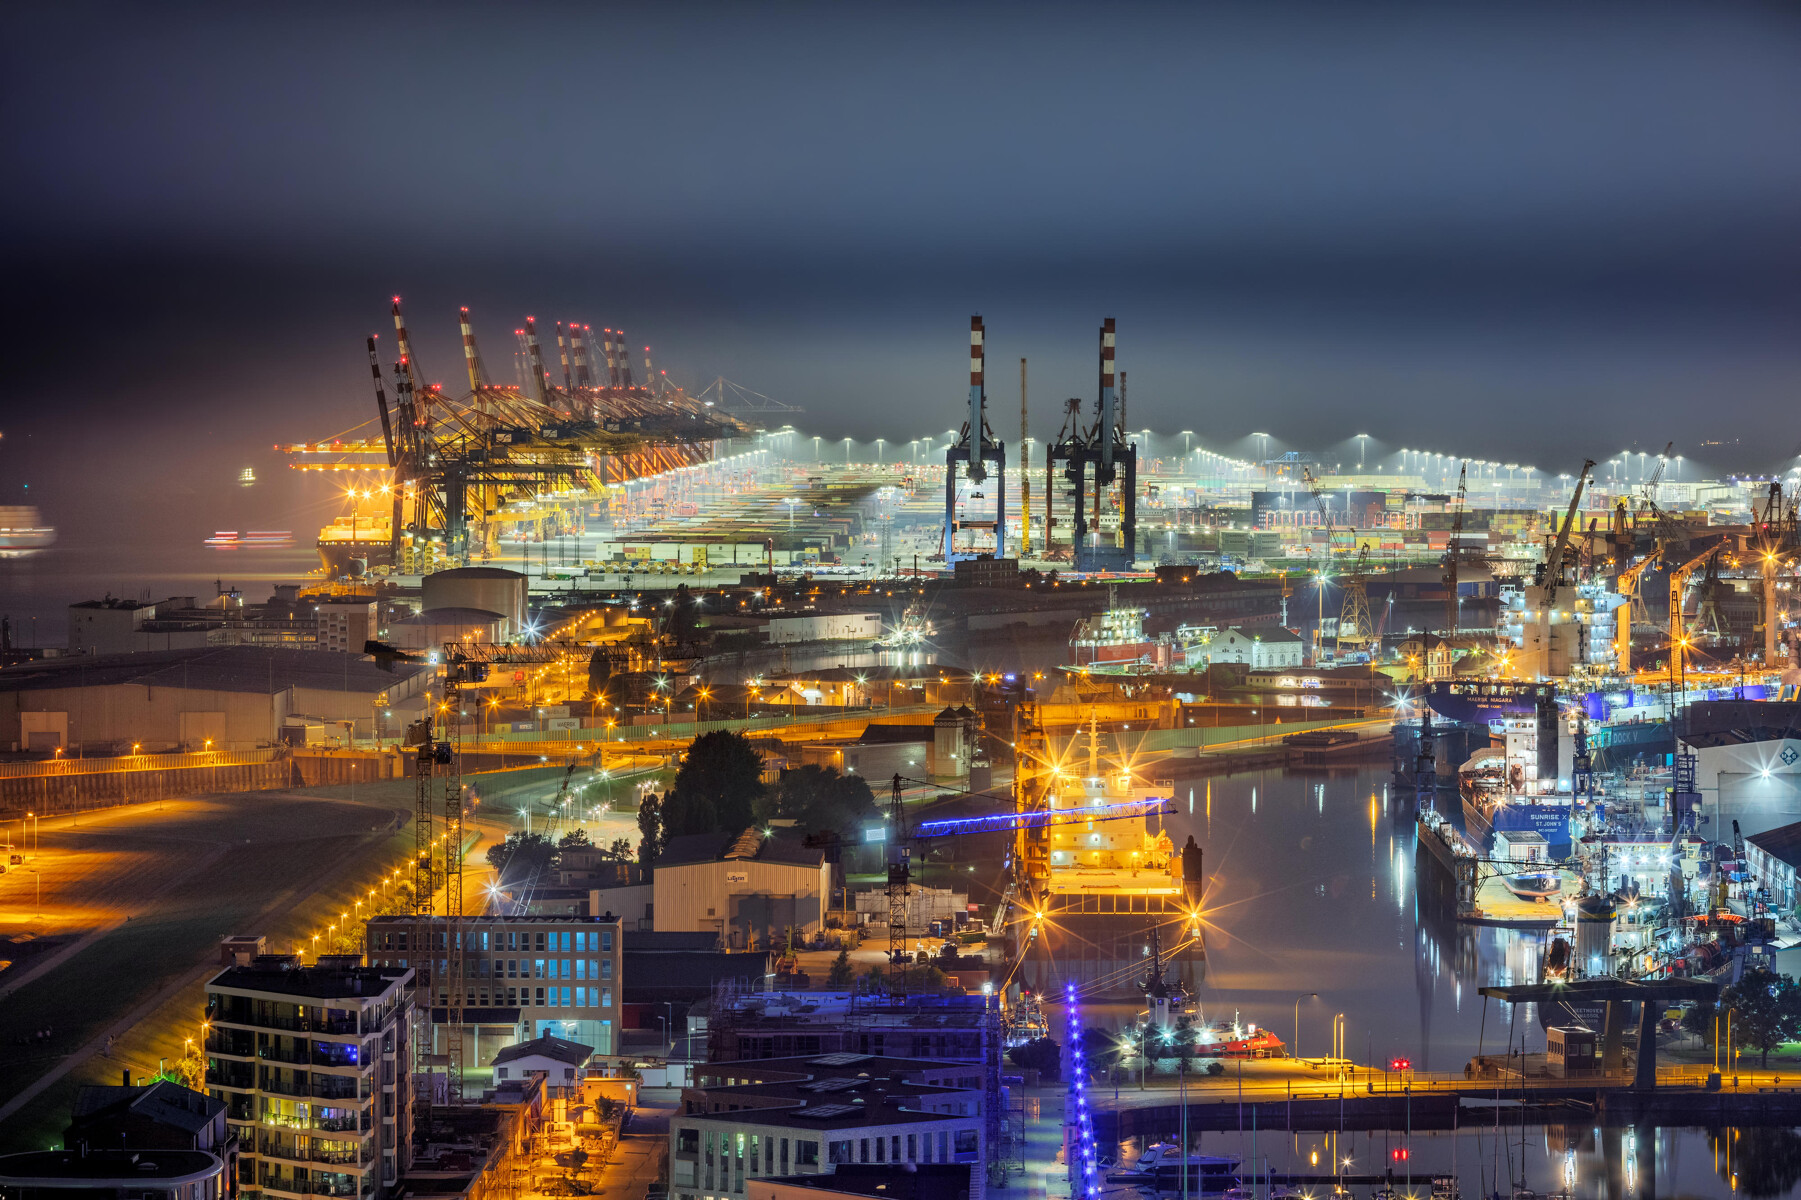 View of the city of Bremerhaven at night